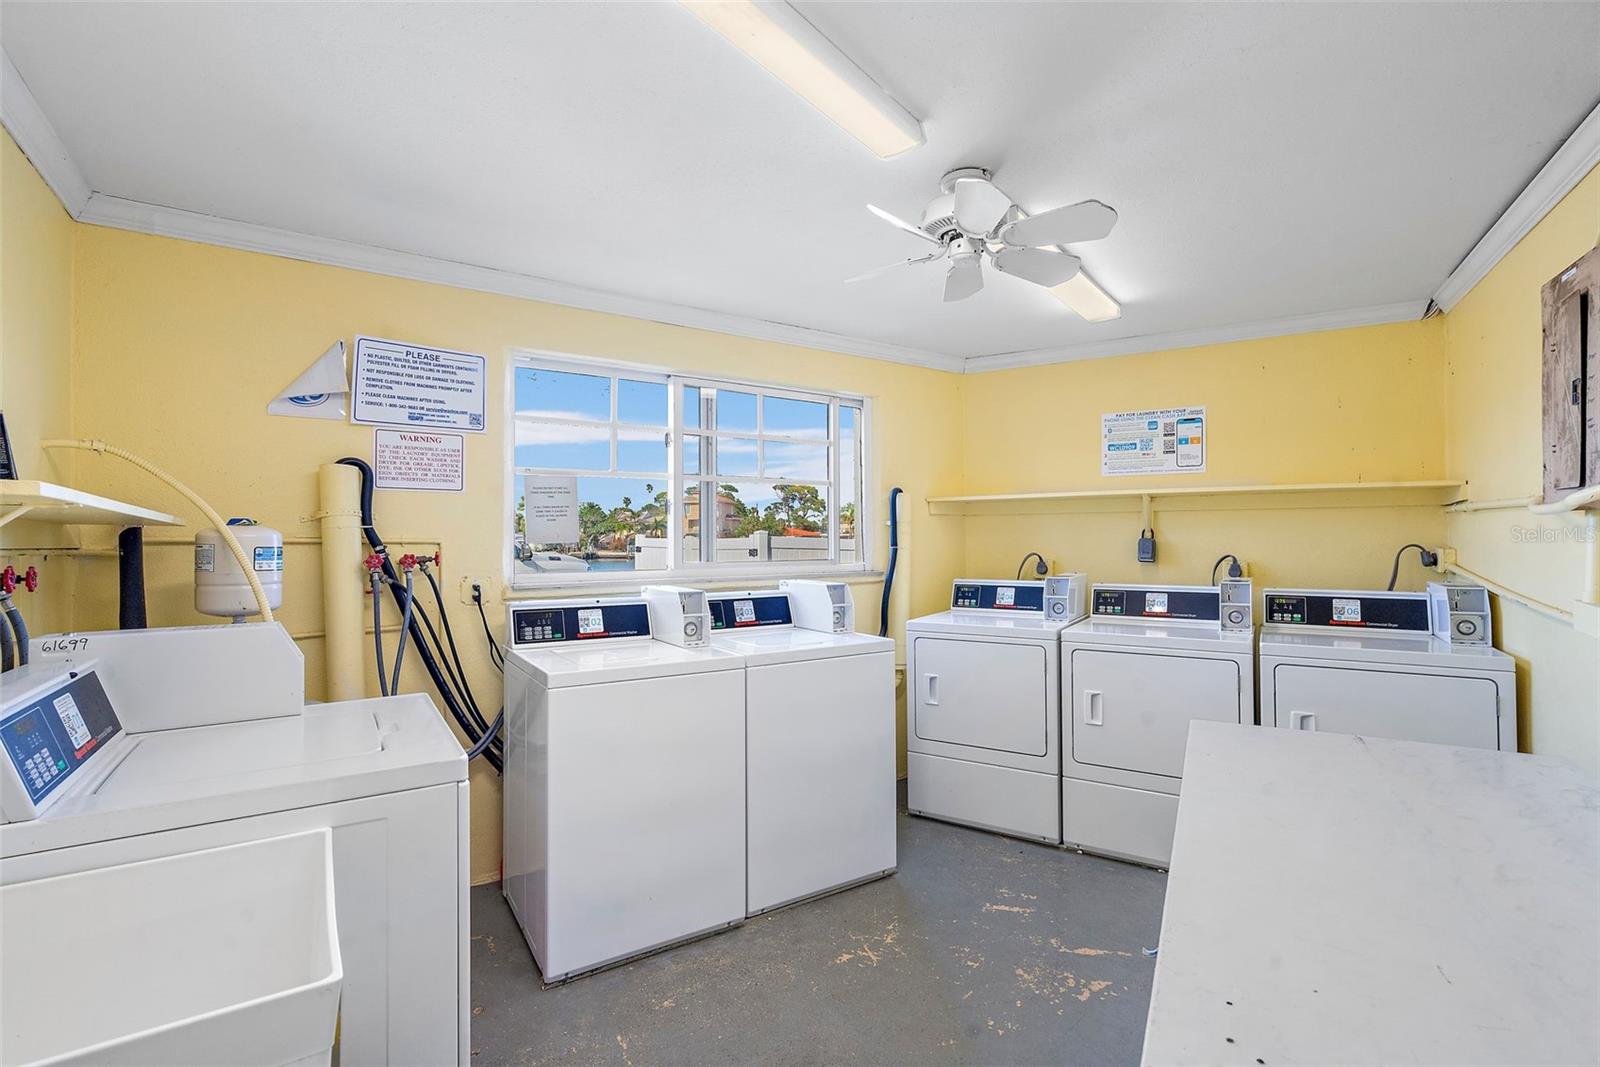 There is an onsite laundry room. However, 210 has its own full-size washer and dryer. This is still great when you want to get a bunch of sandy beach towels done and can wash them all at once!